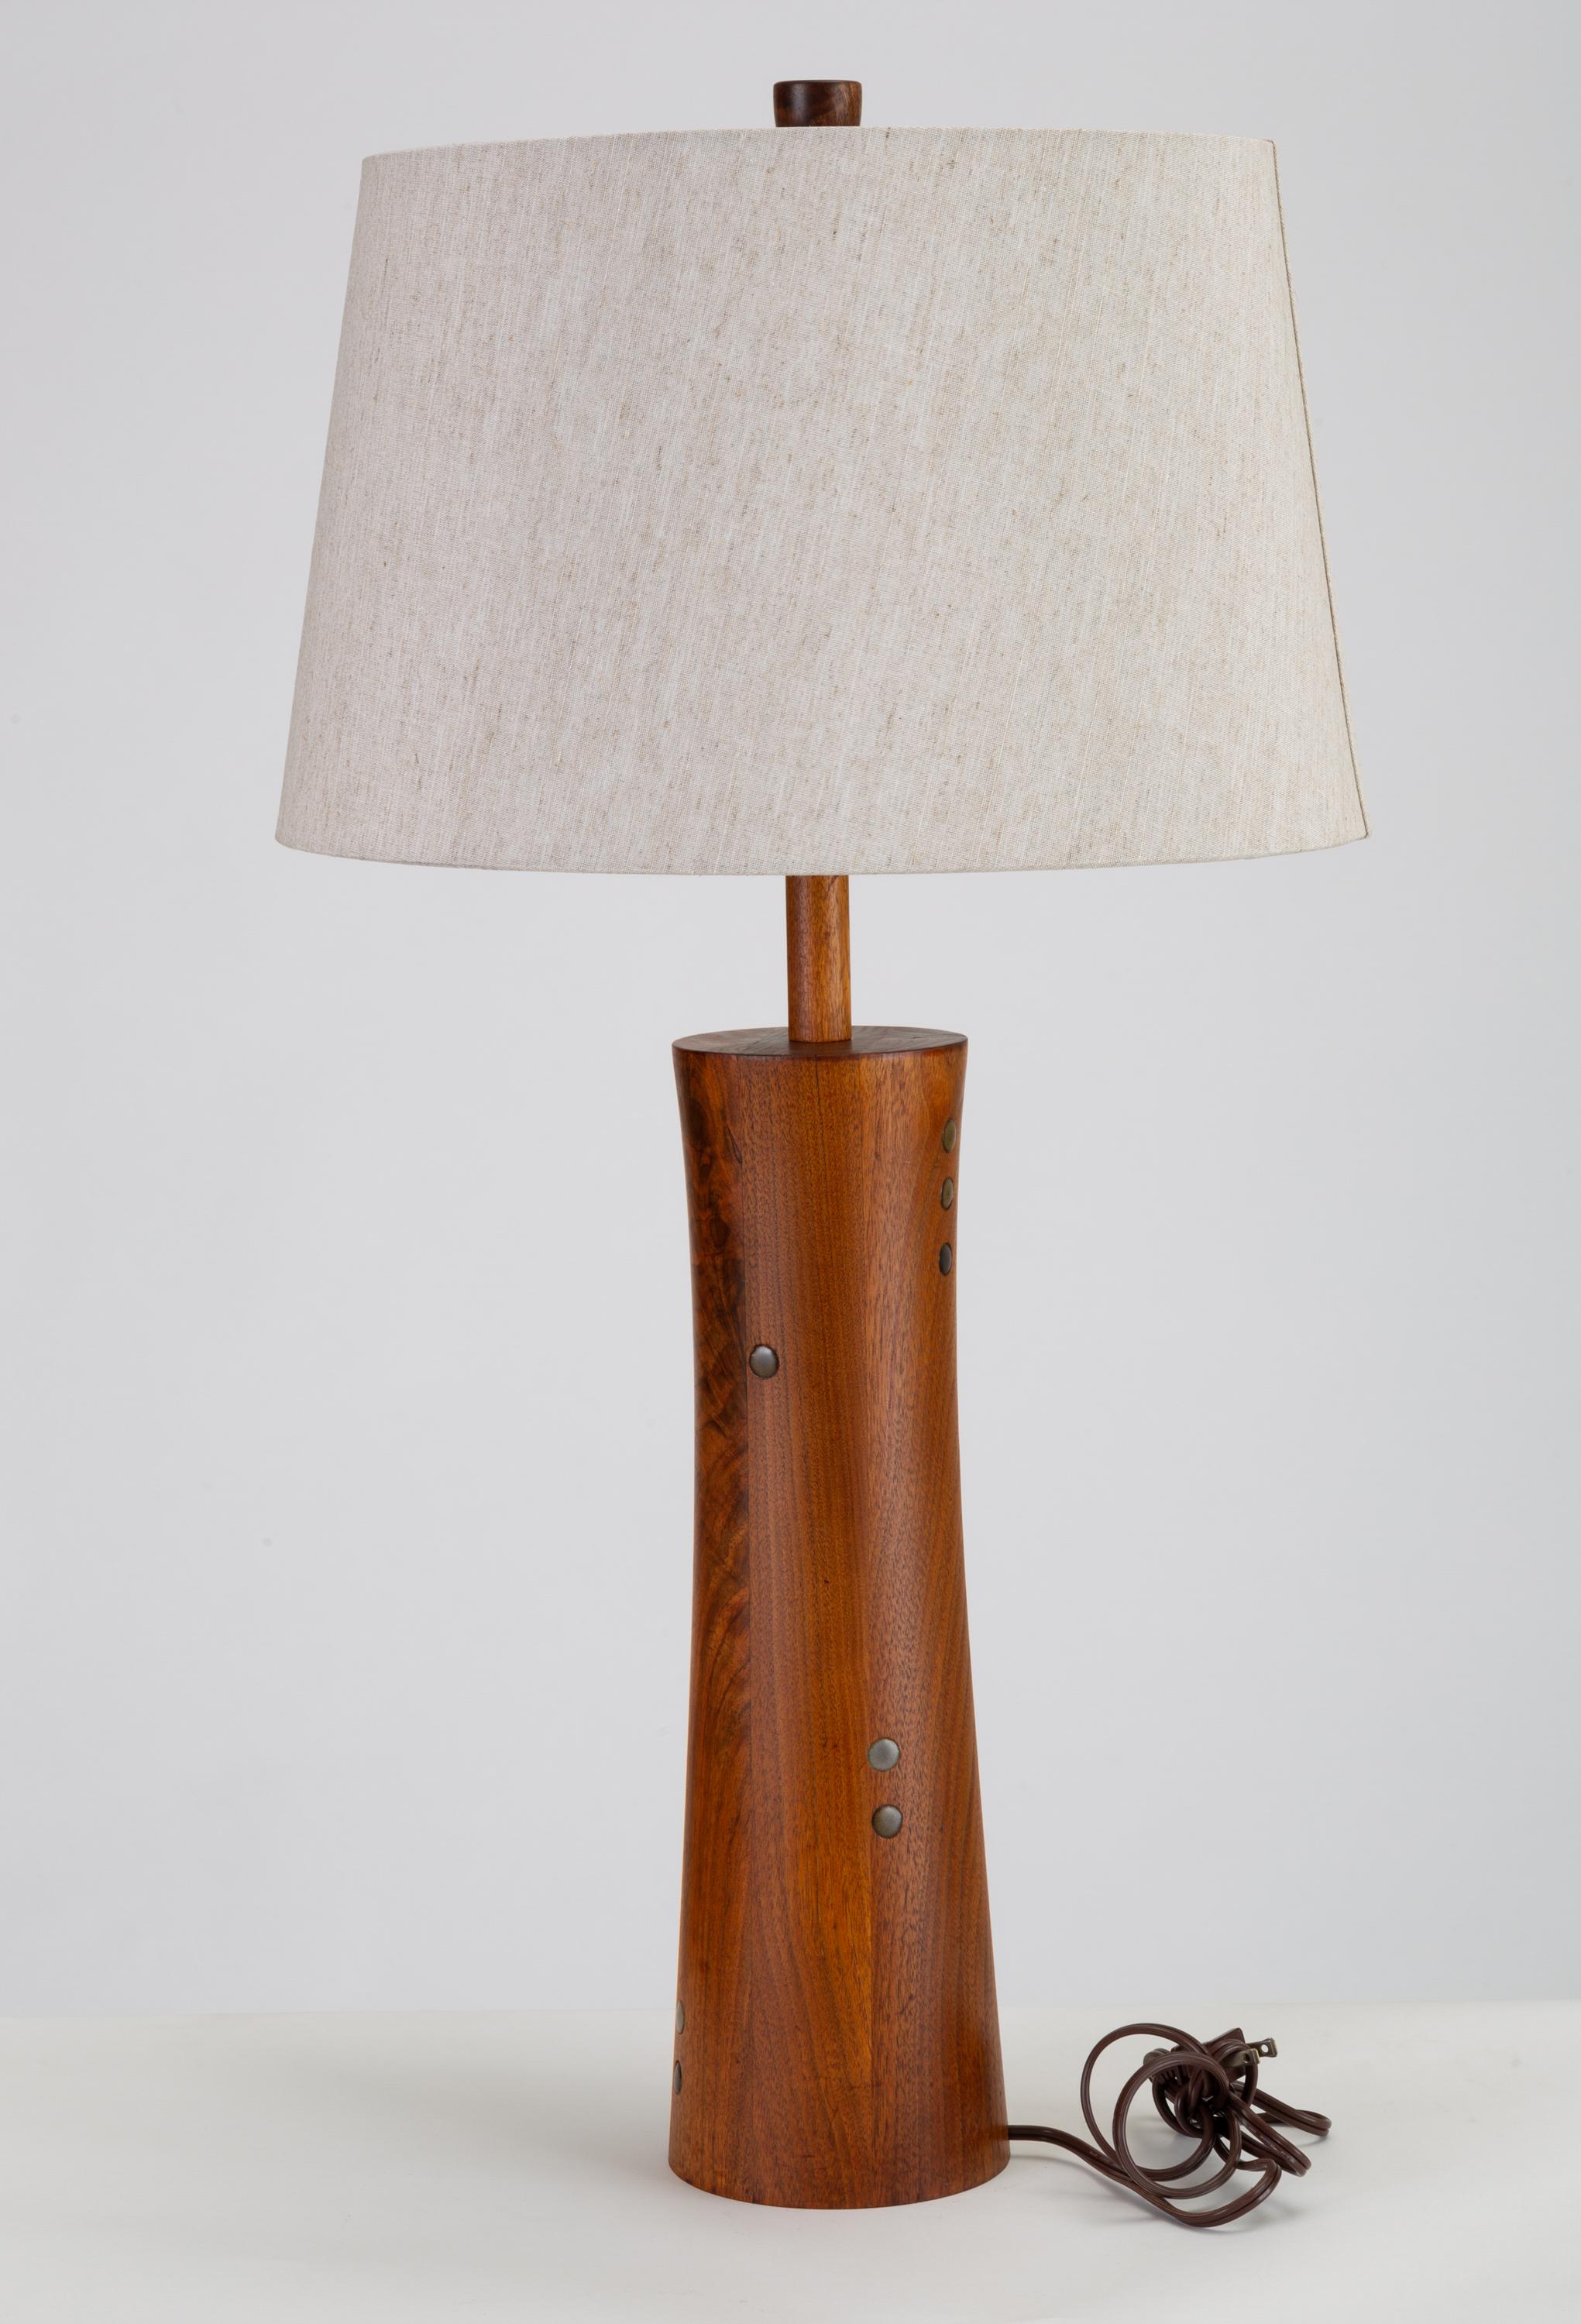 A lathe-turned walnut lamp from Midwestern ceramics artists Gordon and Jane Martz for their company Marshall Studios. The table lamp has a slightly hourglass shape, and is inlaid with small ceramic coins in earth tones. A study in attentive